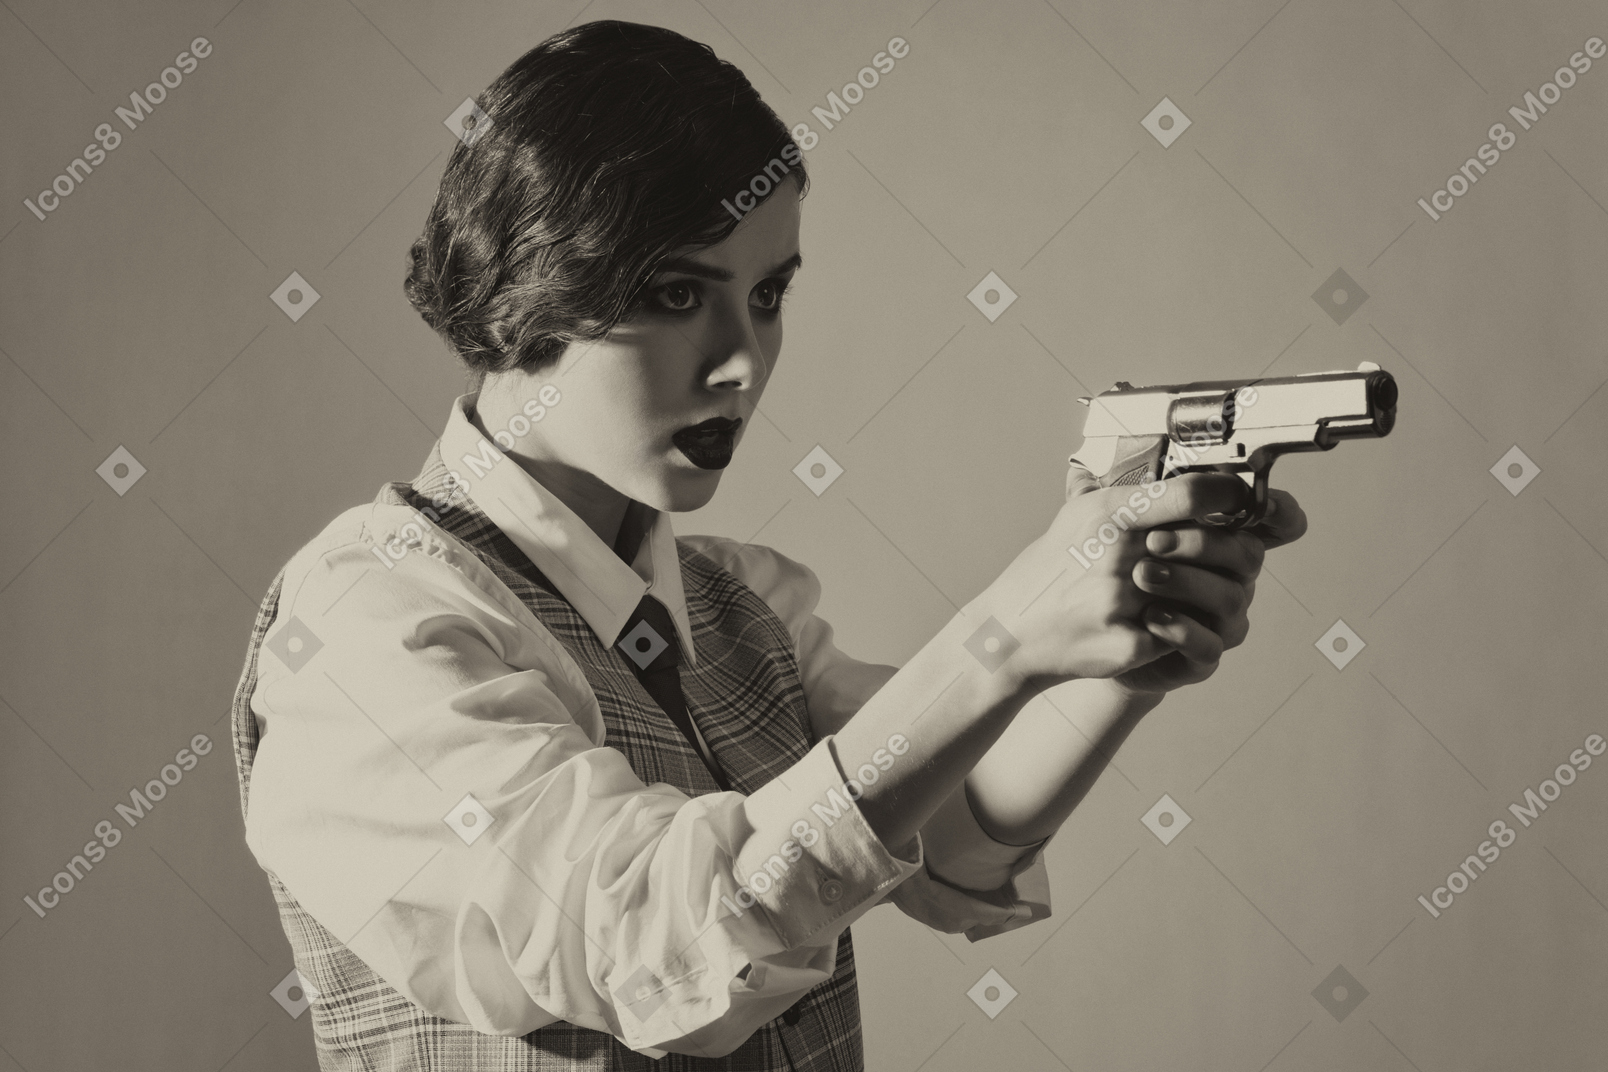 Woman holding a gun with both hands